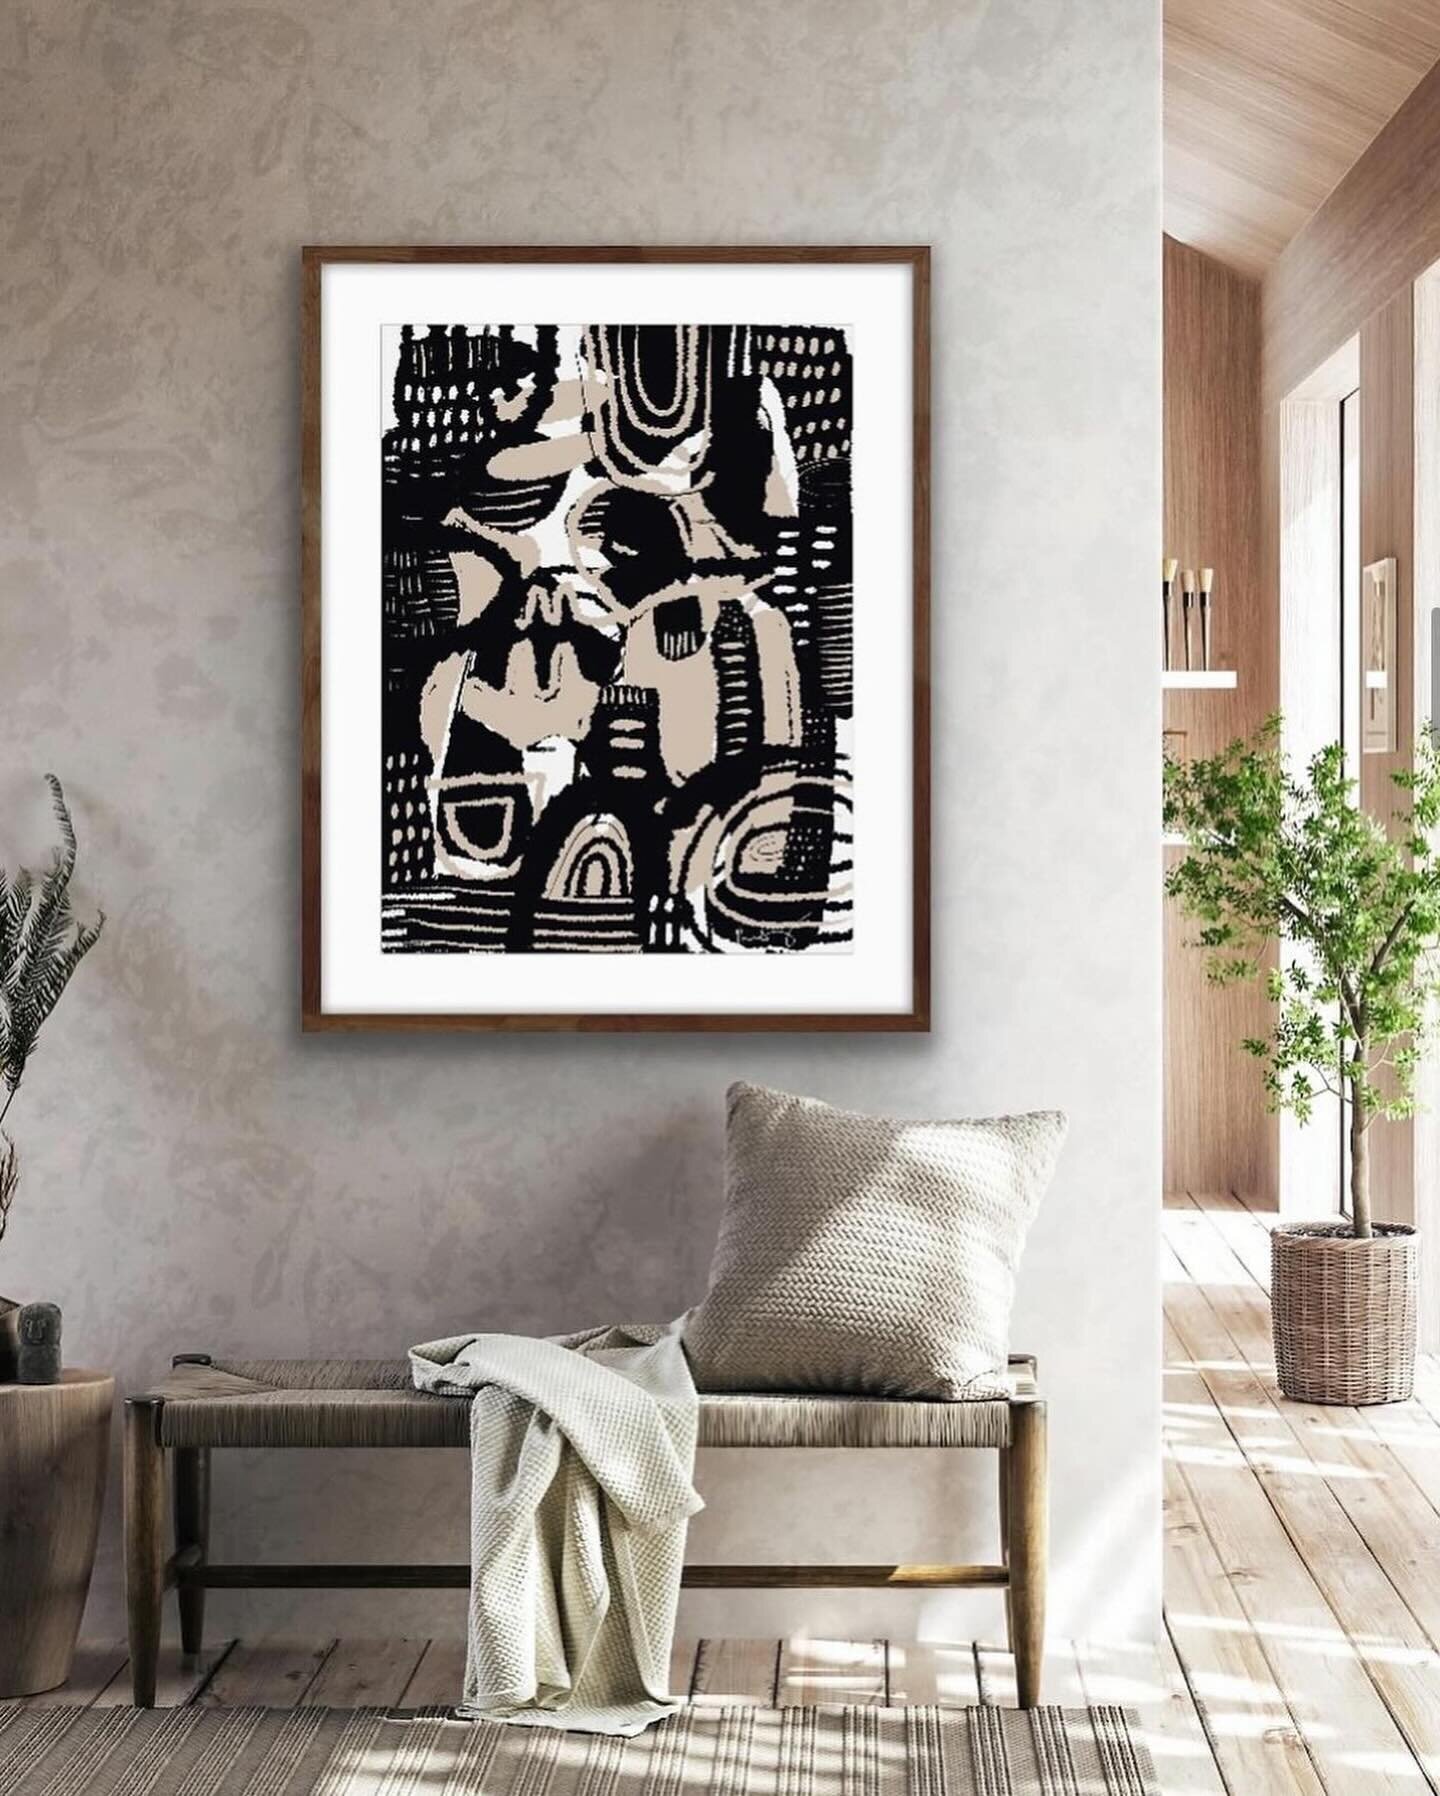 Adding art to your place truly makes it come alive! Here are some incredible works by black artists that you absolutely need to explore to elevate your home decor. @mayapurdiee 
@tarralustudio 
@roma.artist @artbyruth_nj 

#blackartist #blackinterior